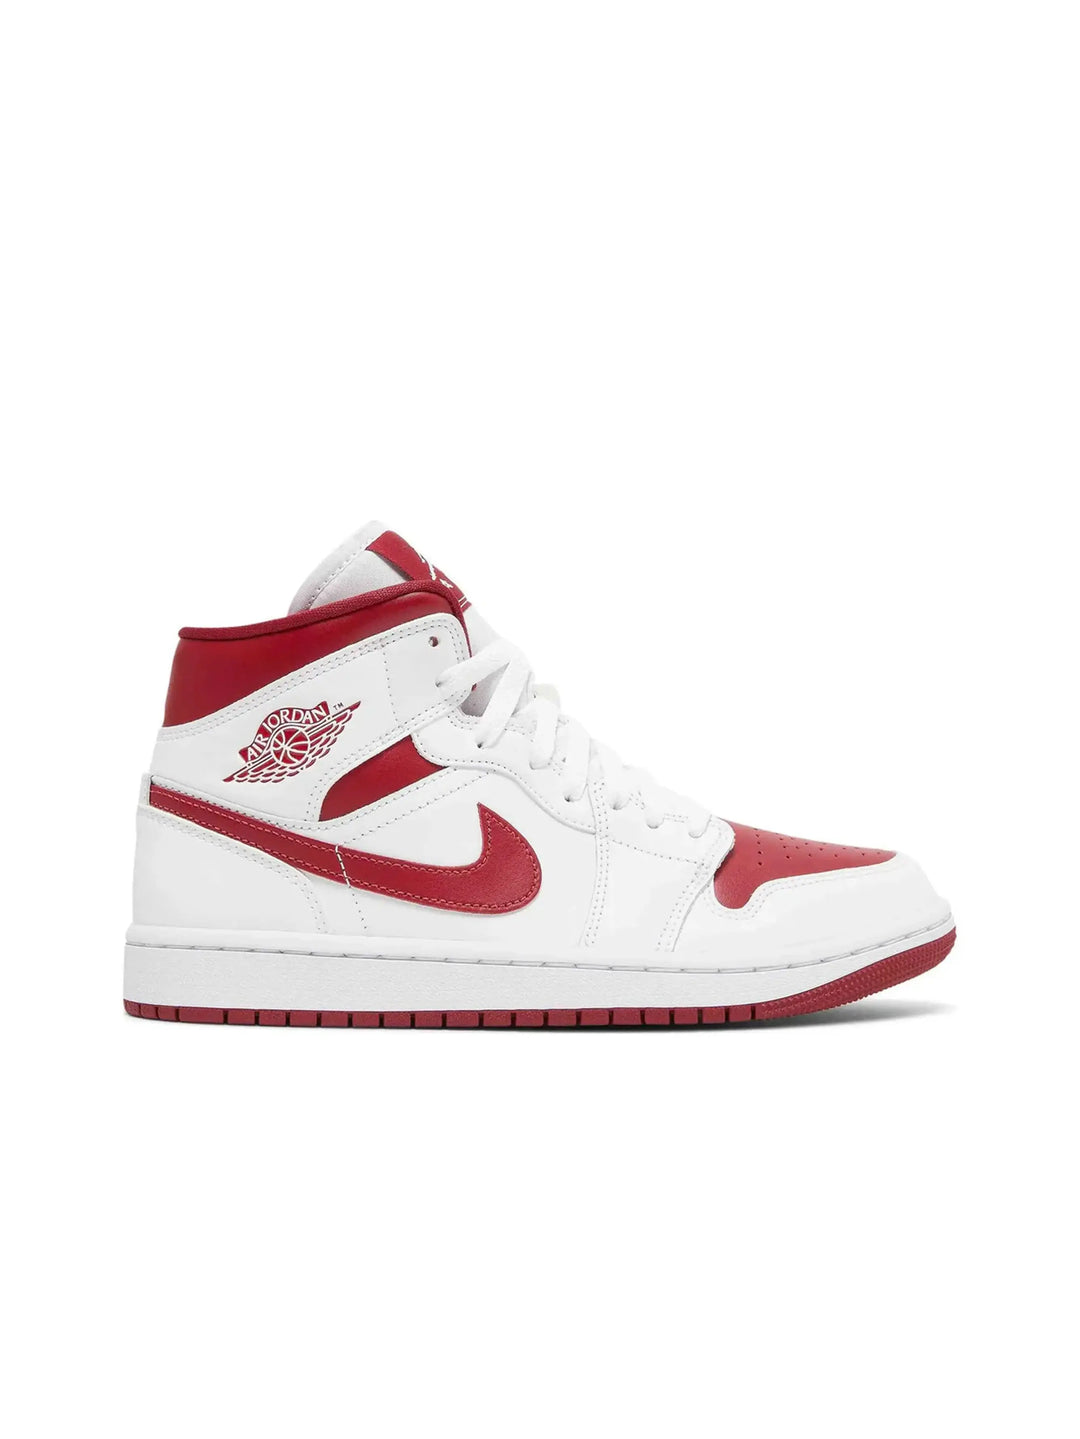 Nike Air Jordan 1 Mid Reverse Chicago (W) in Auckland, New Zealand - Shop name